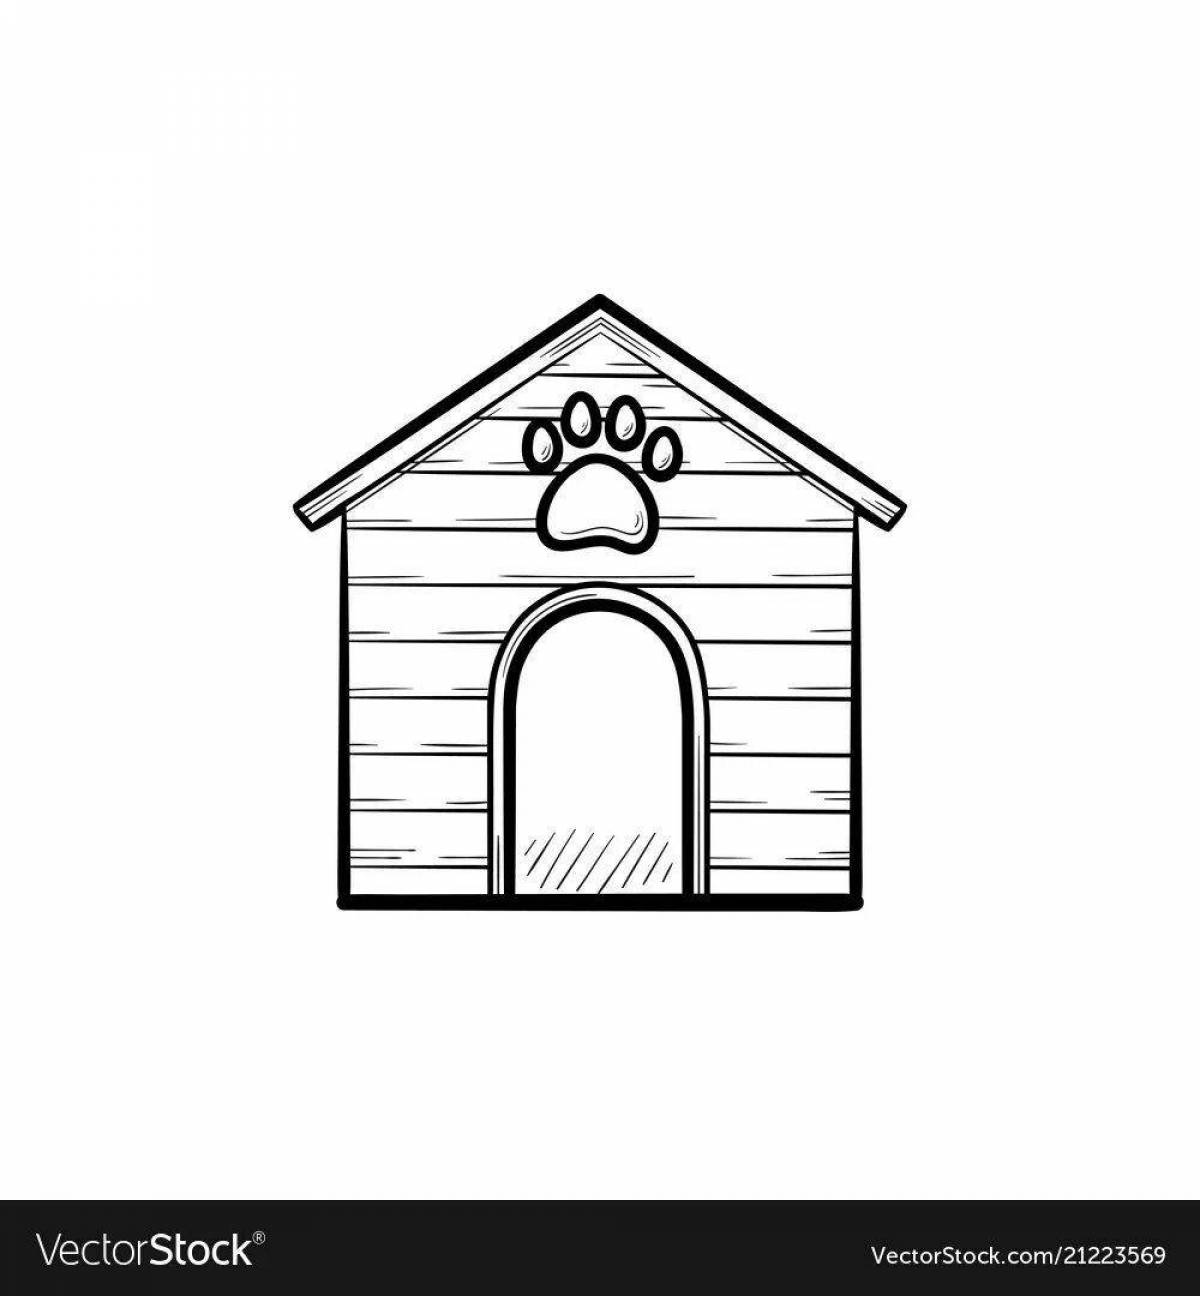 Coloring book sparkling dog house